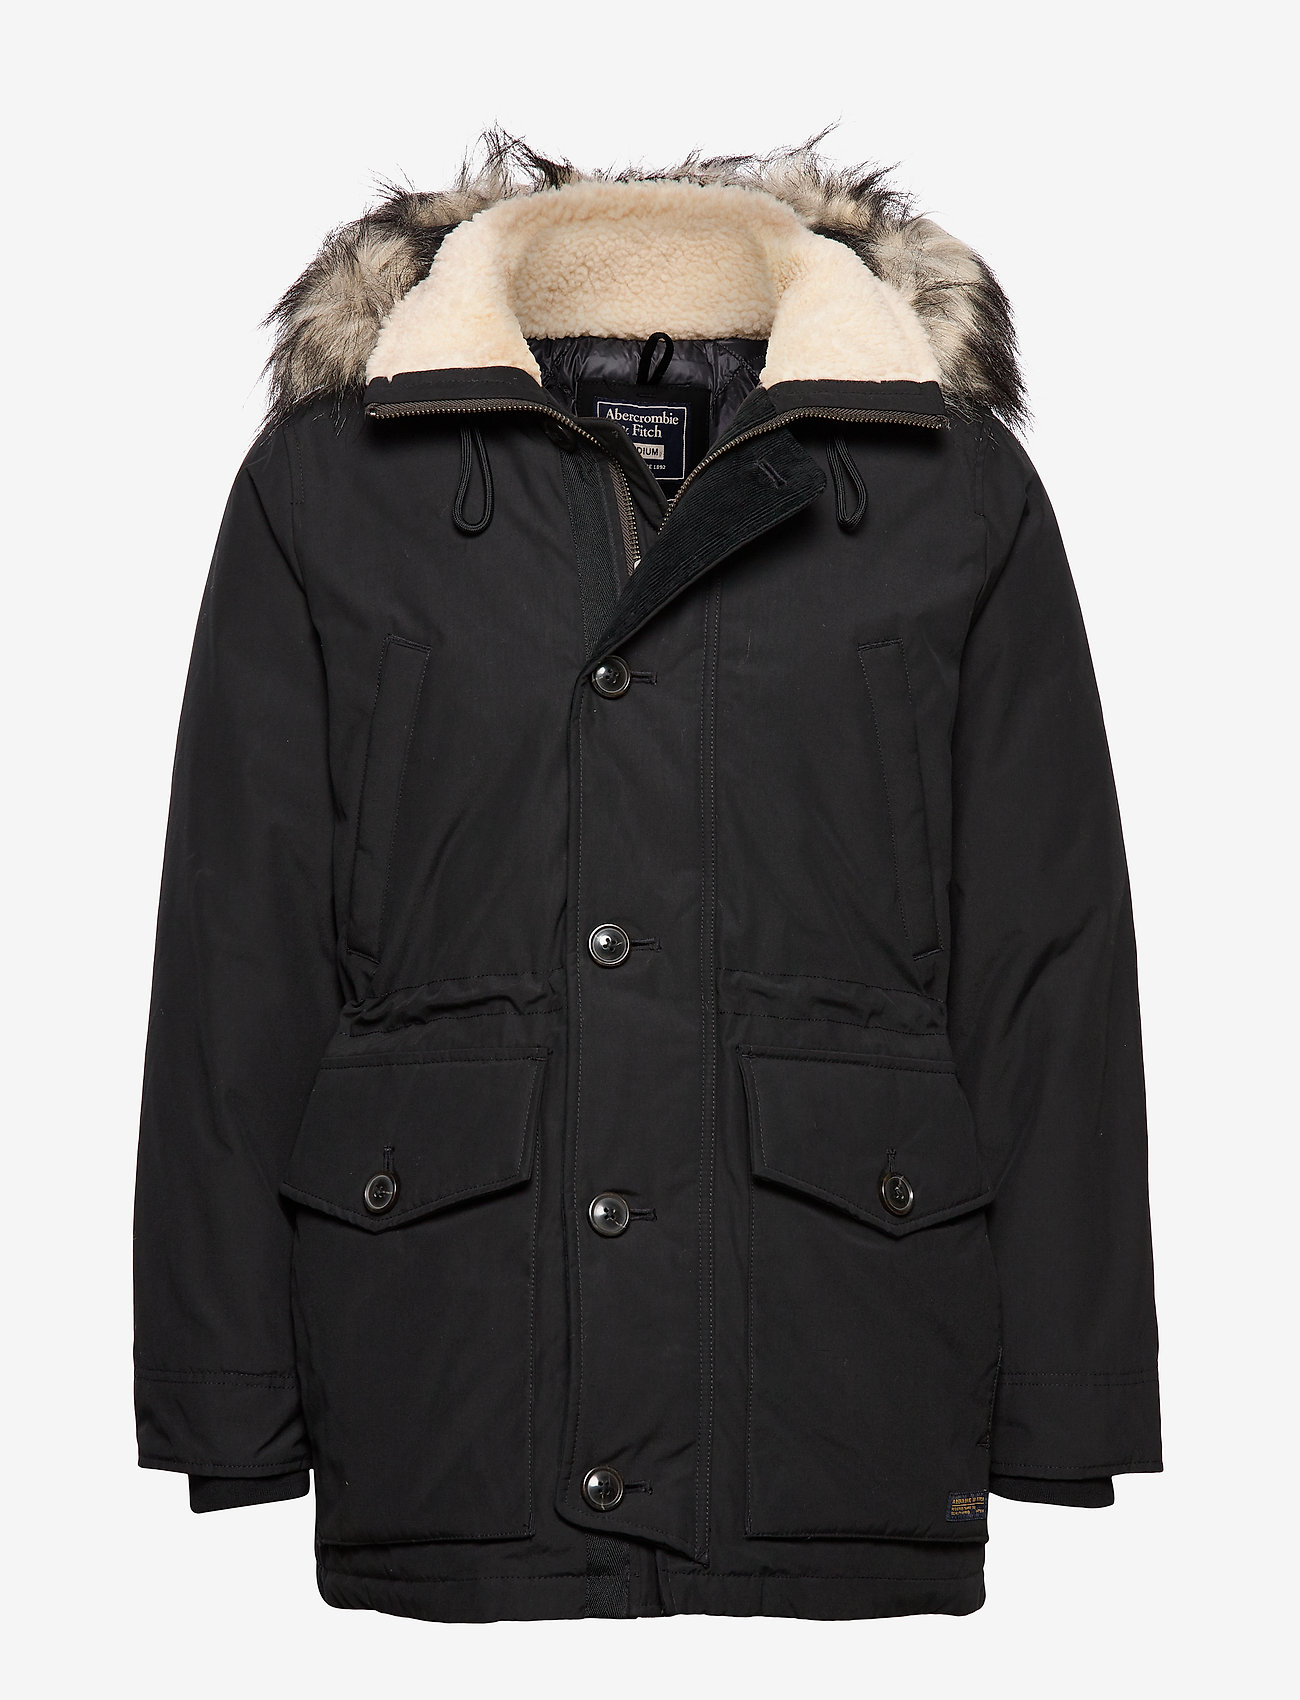 abercrombie and fitch ultra parka review